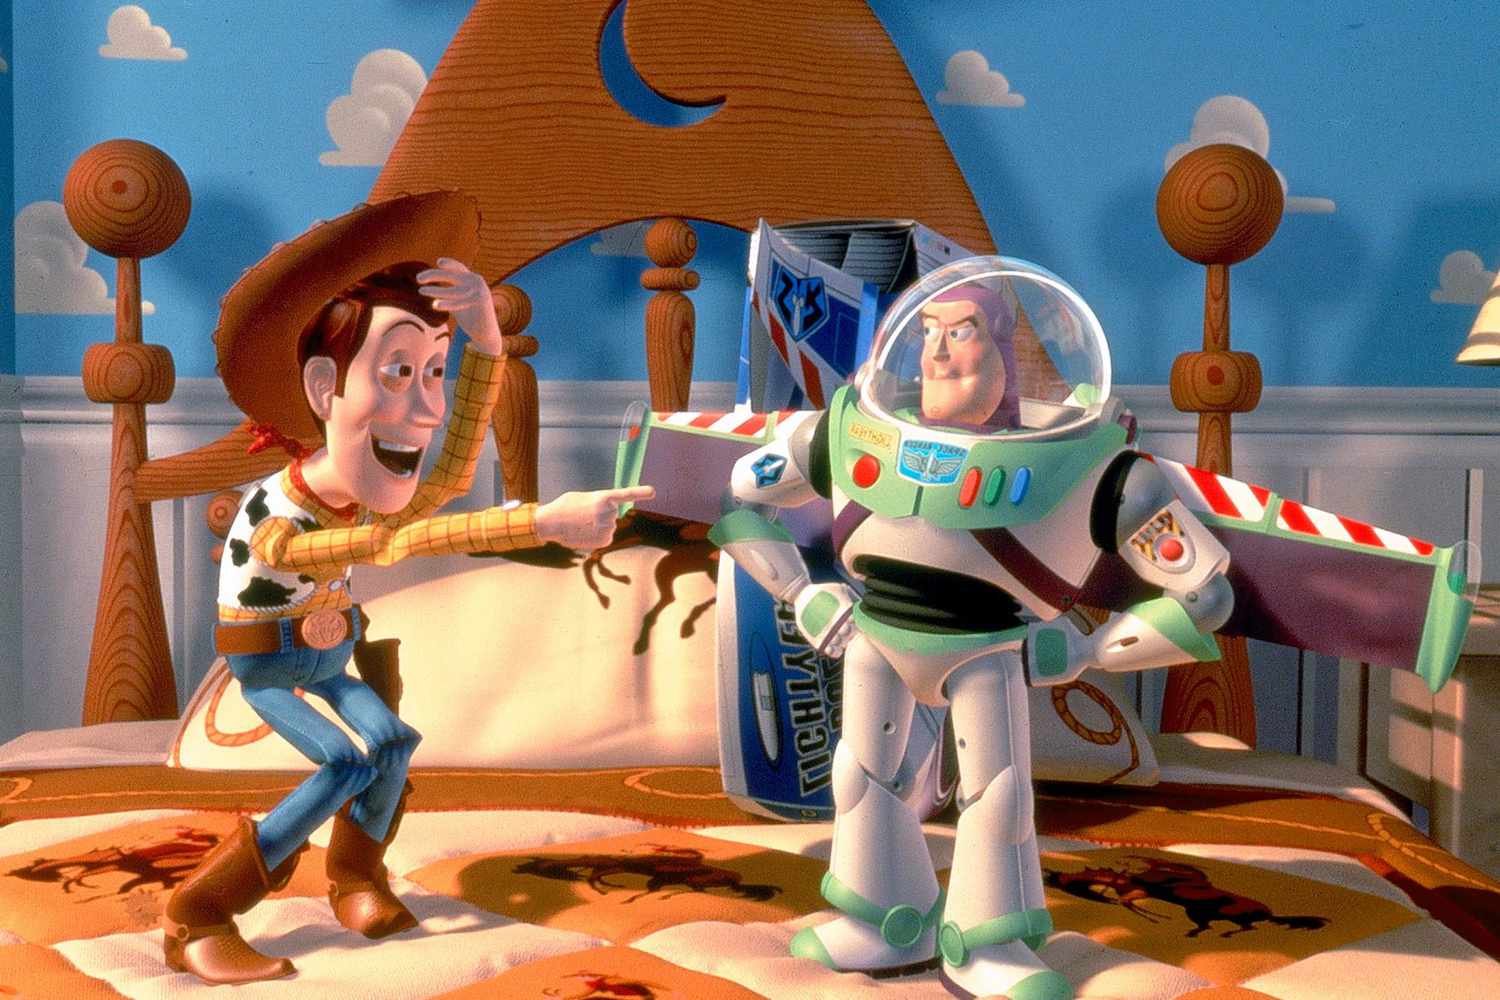 6. Toy Story (1995)